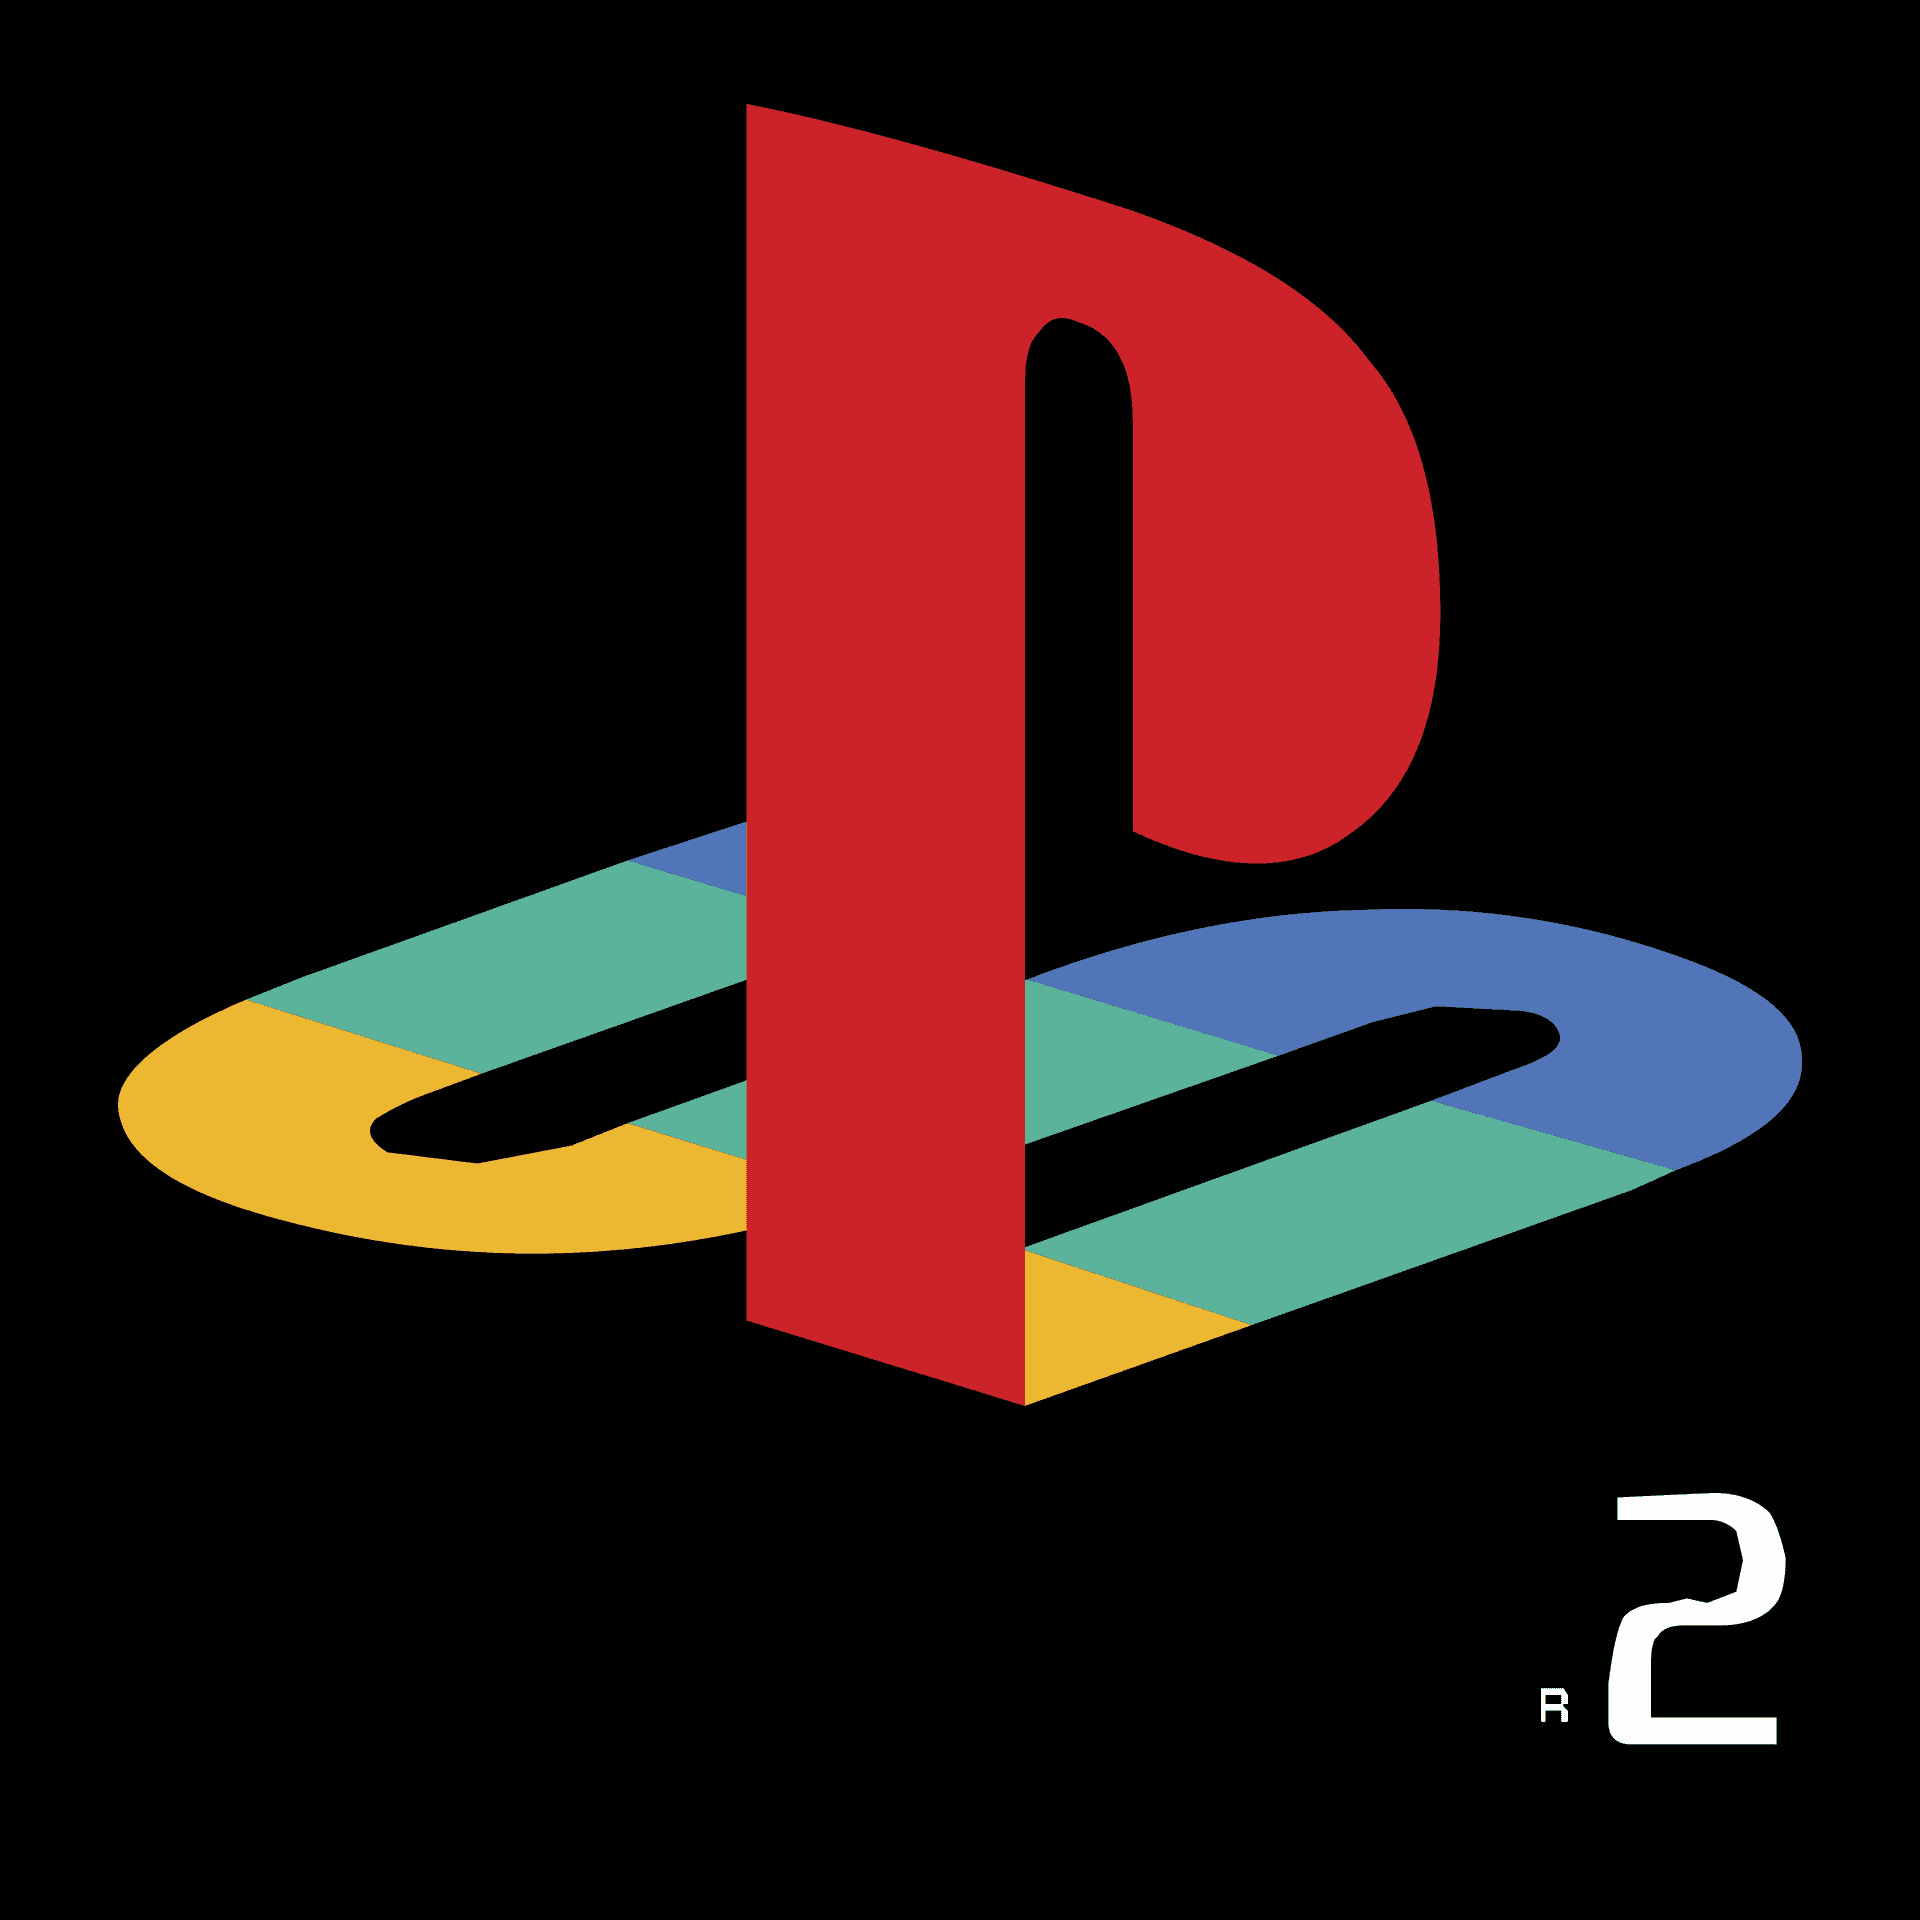 Download Playstation Pictures | Wallpapers.com